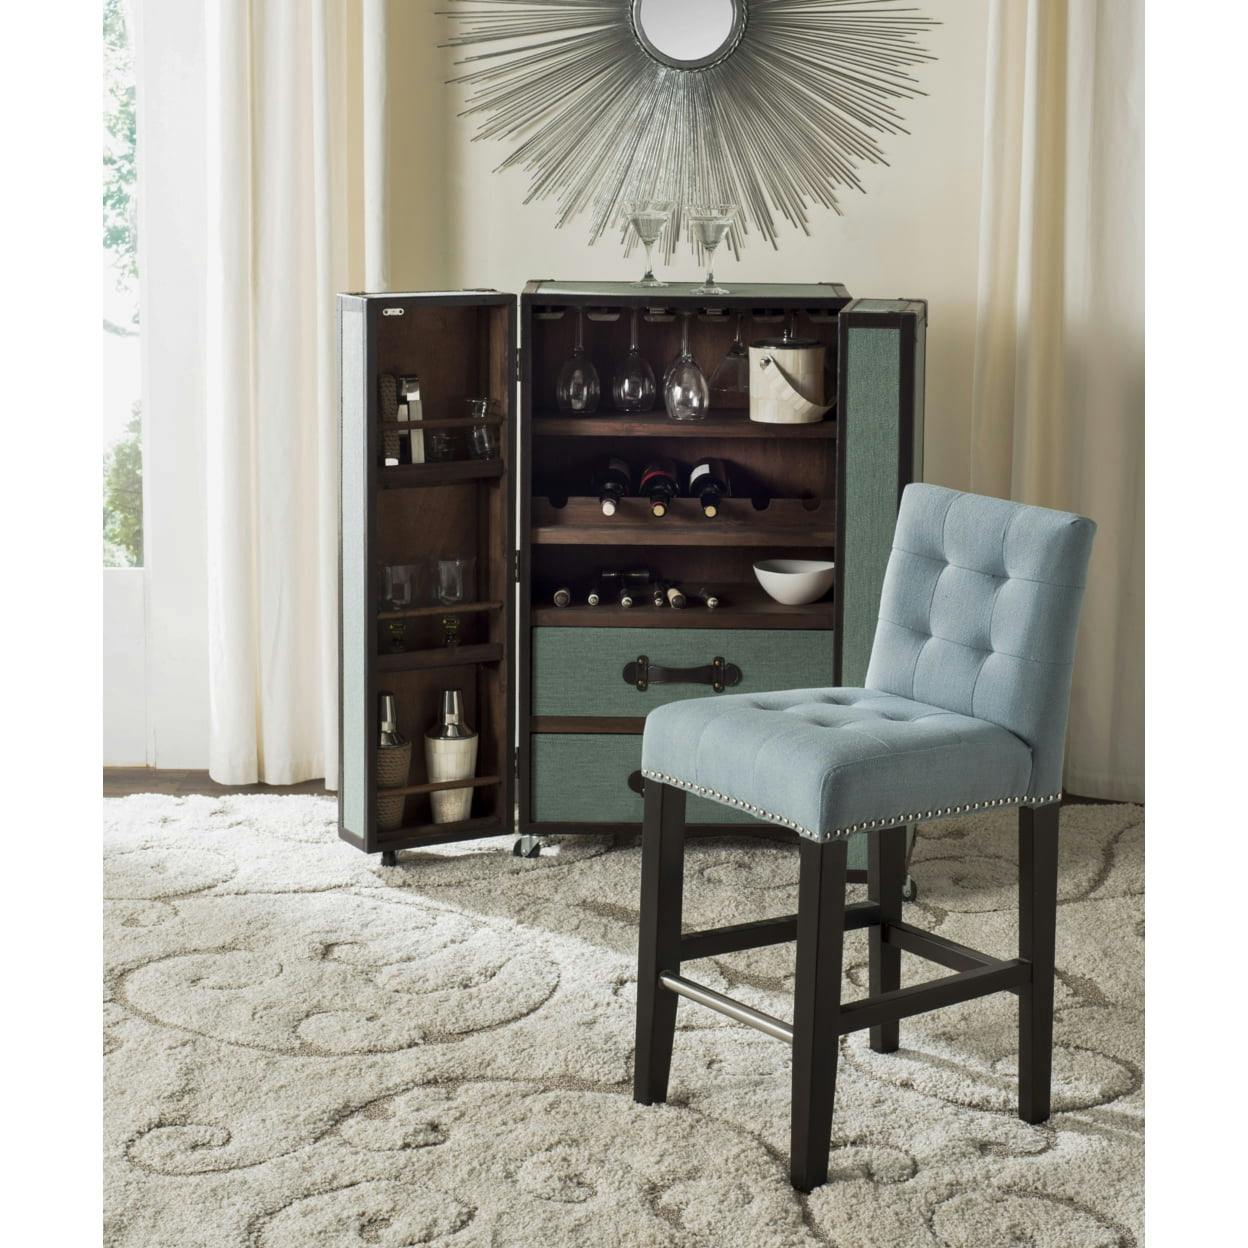 Transitional Sky Blue Leather & Metal Counter Stool with Silver Nailheads